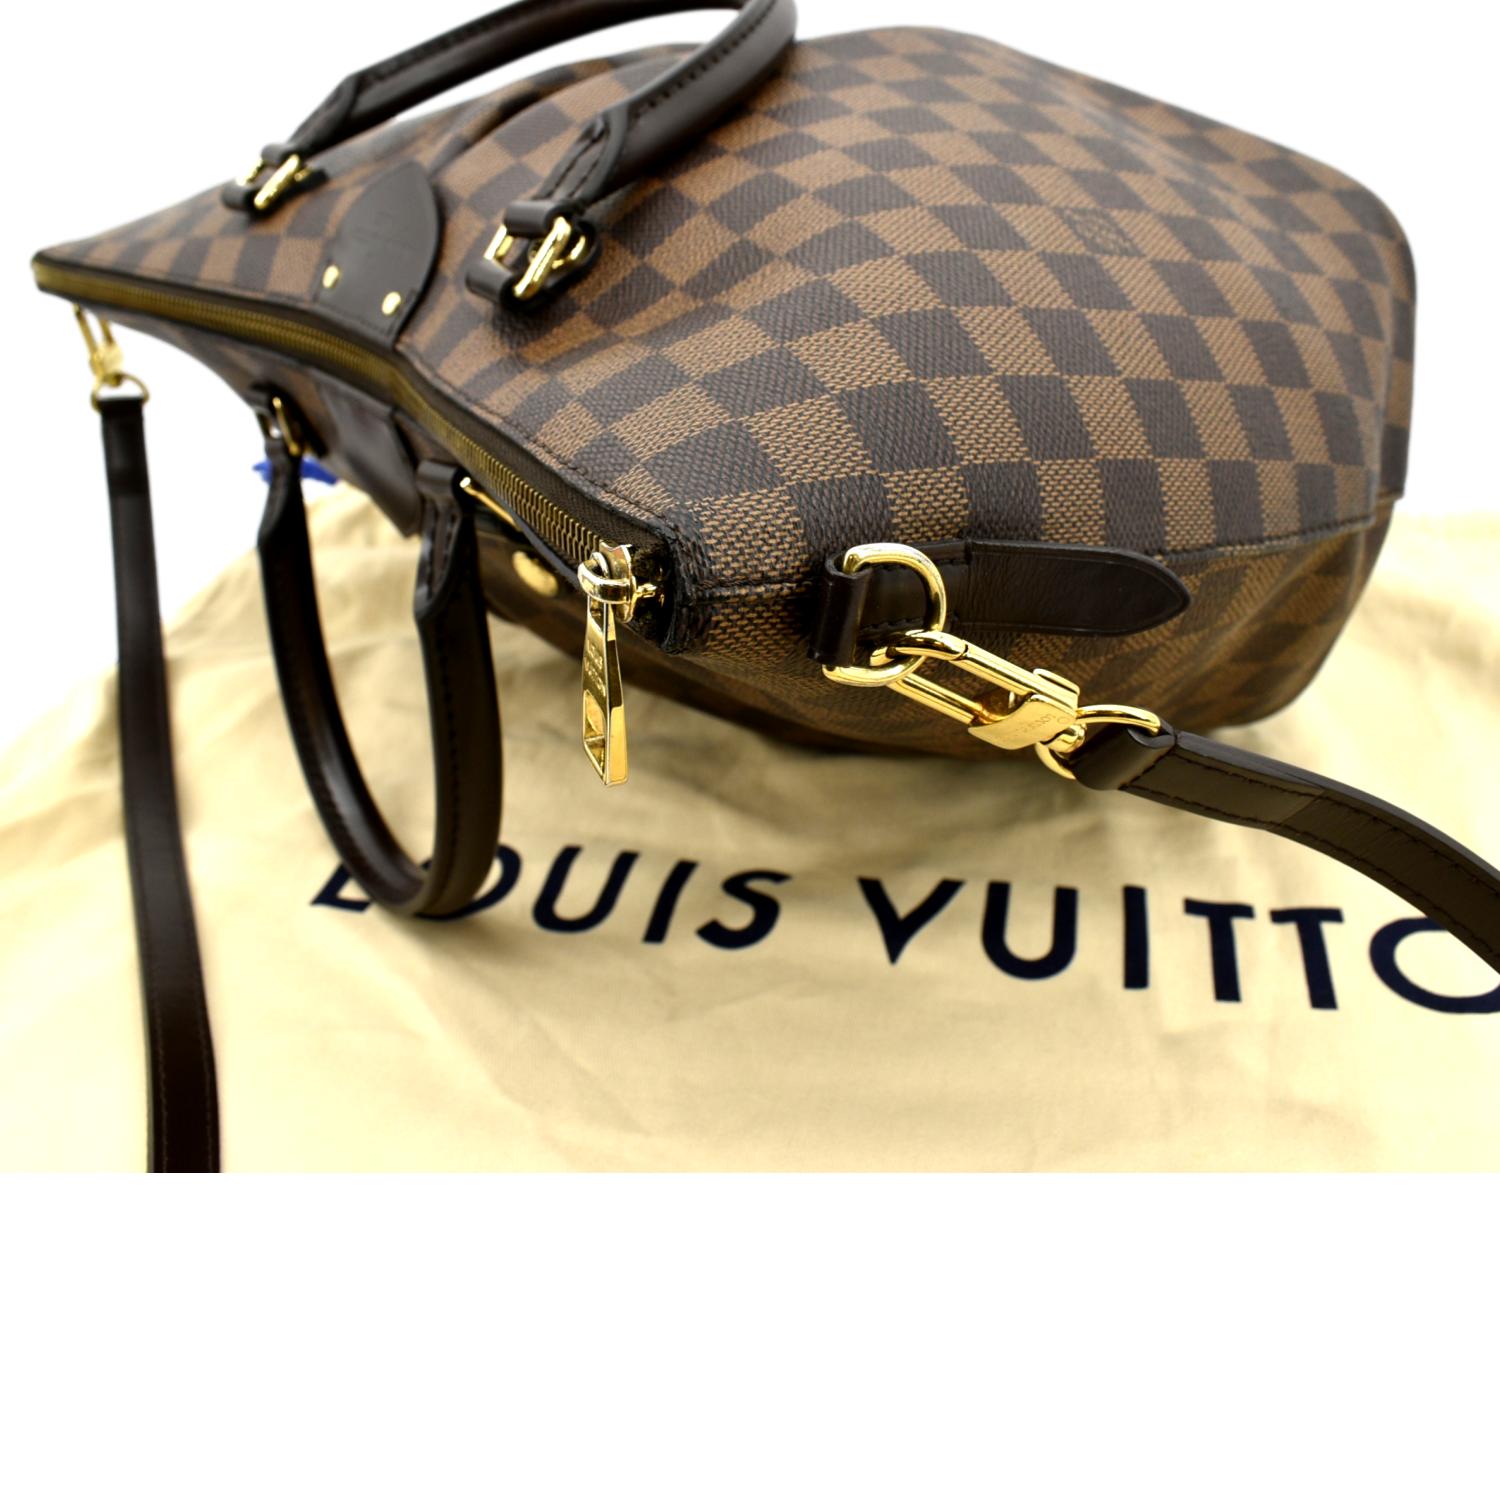 Siena leather handbag Louis Vuitton Brown in Leather - 36510297